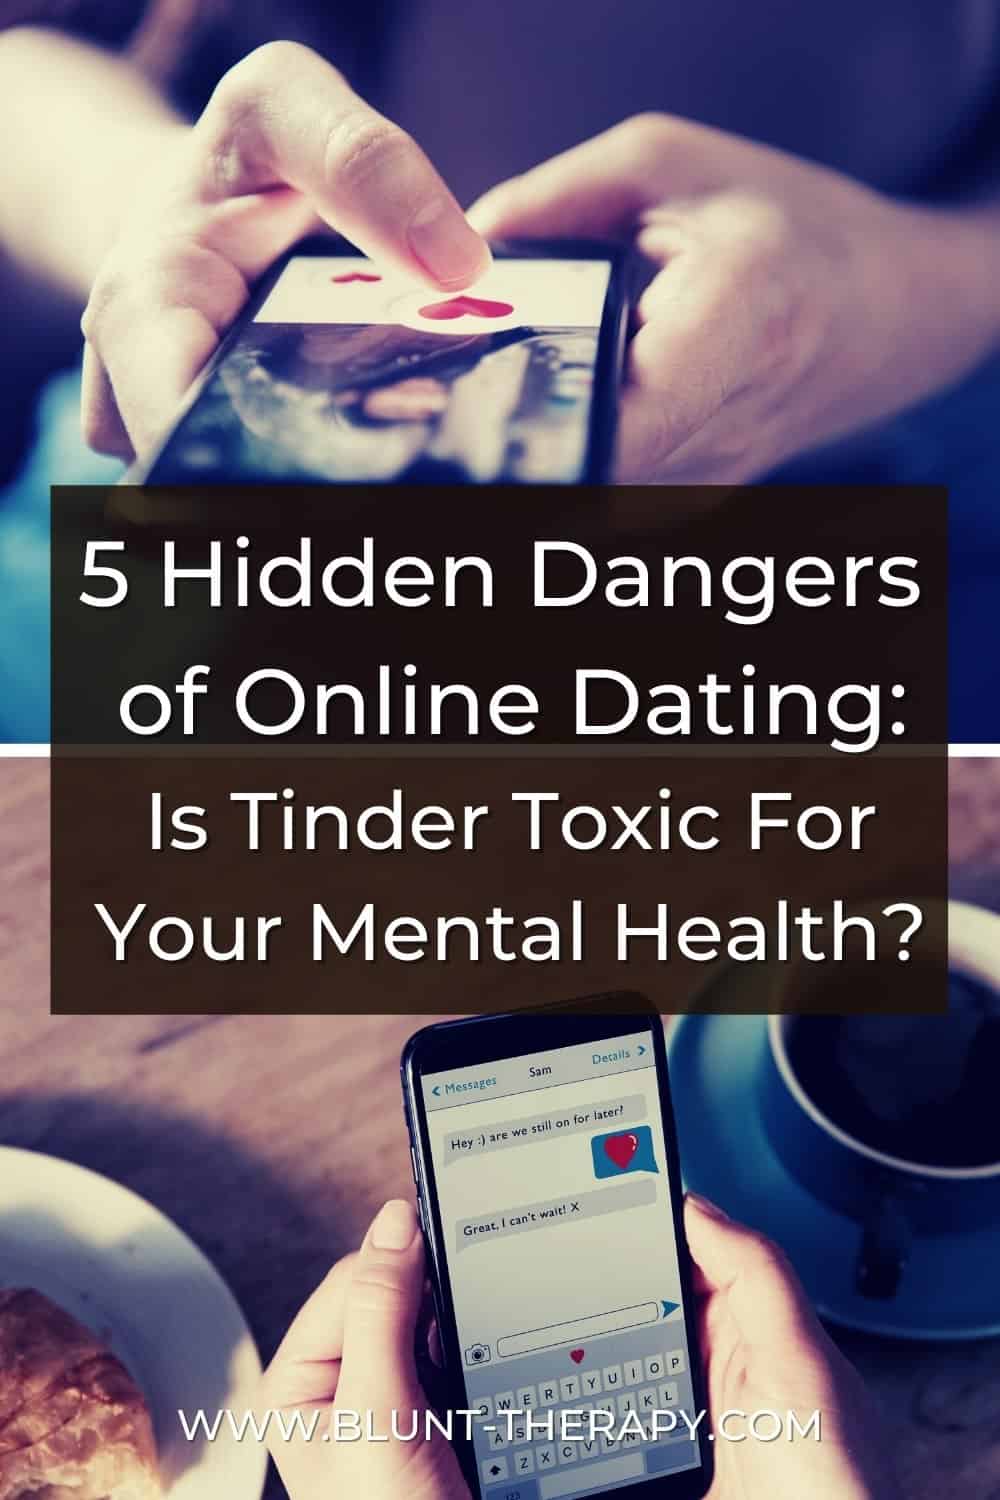 5 Hidden Dangers of Online Dating Apps Is Tinder Toxic For Your Mental Health